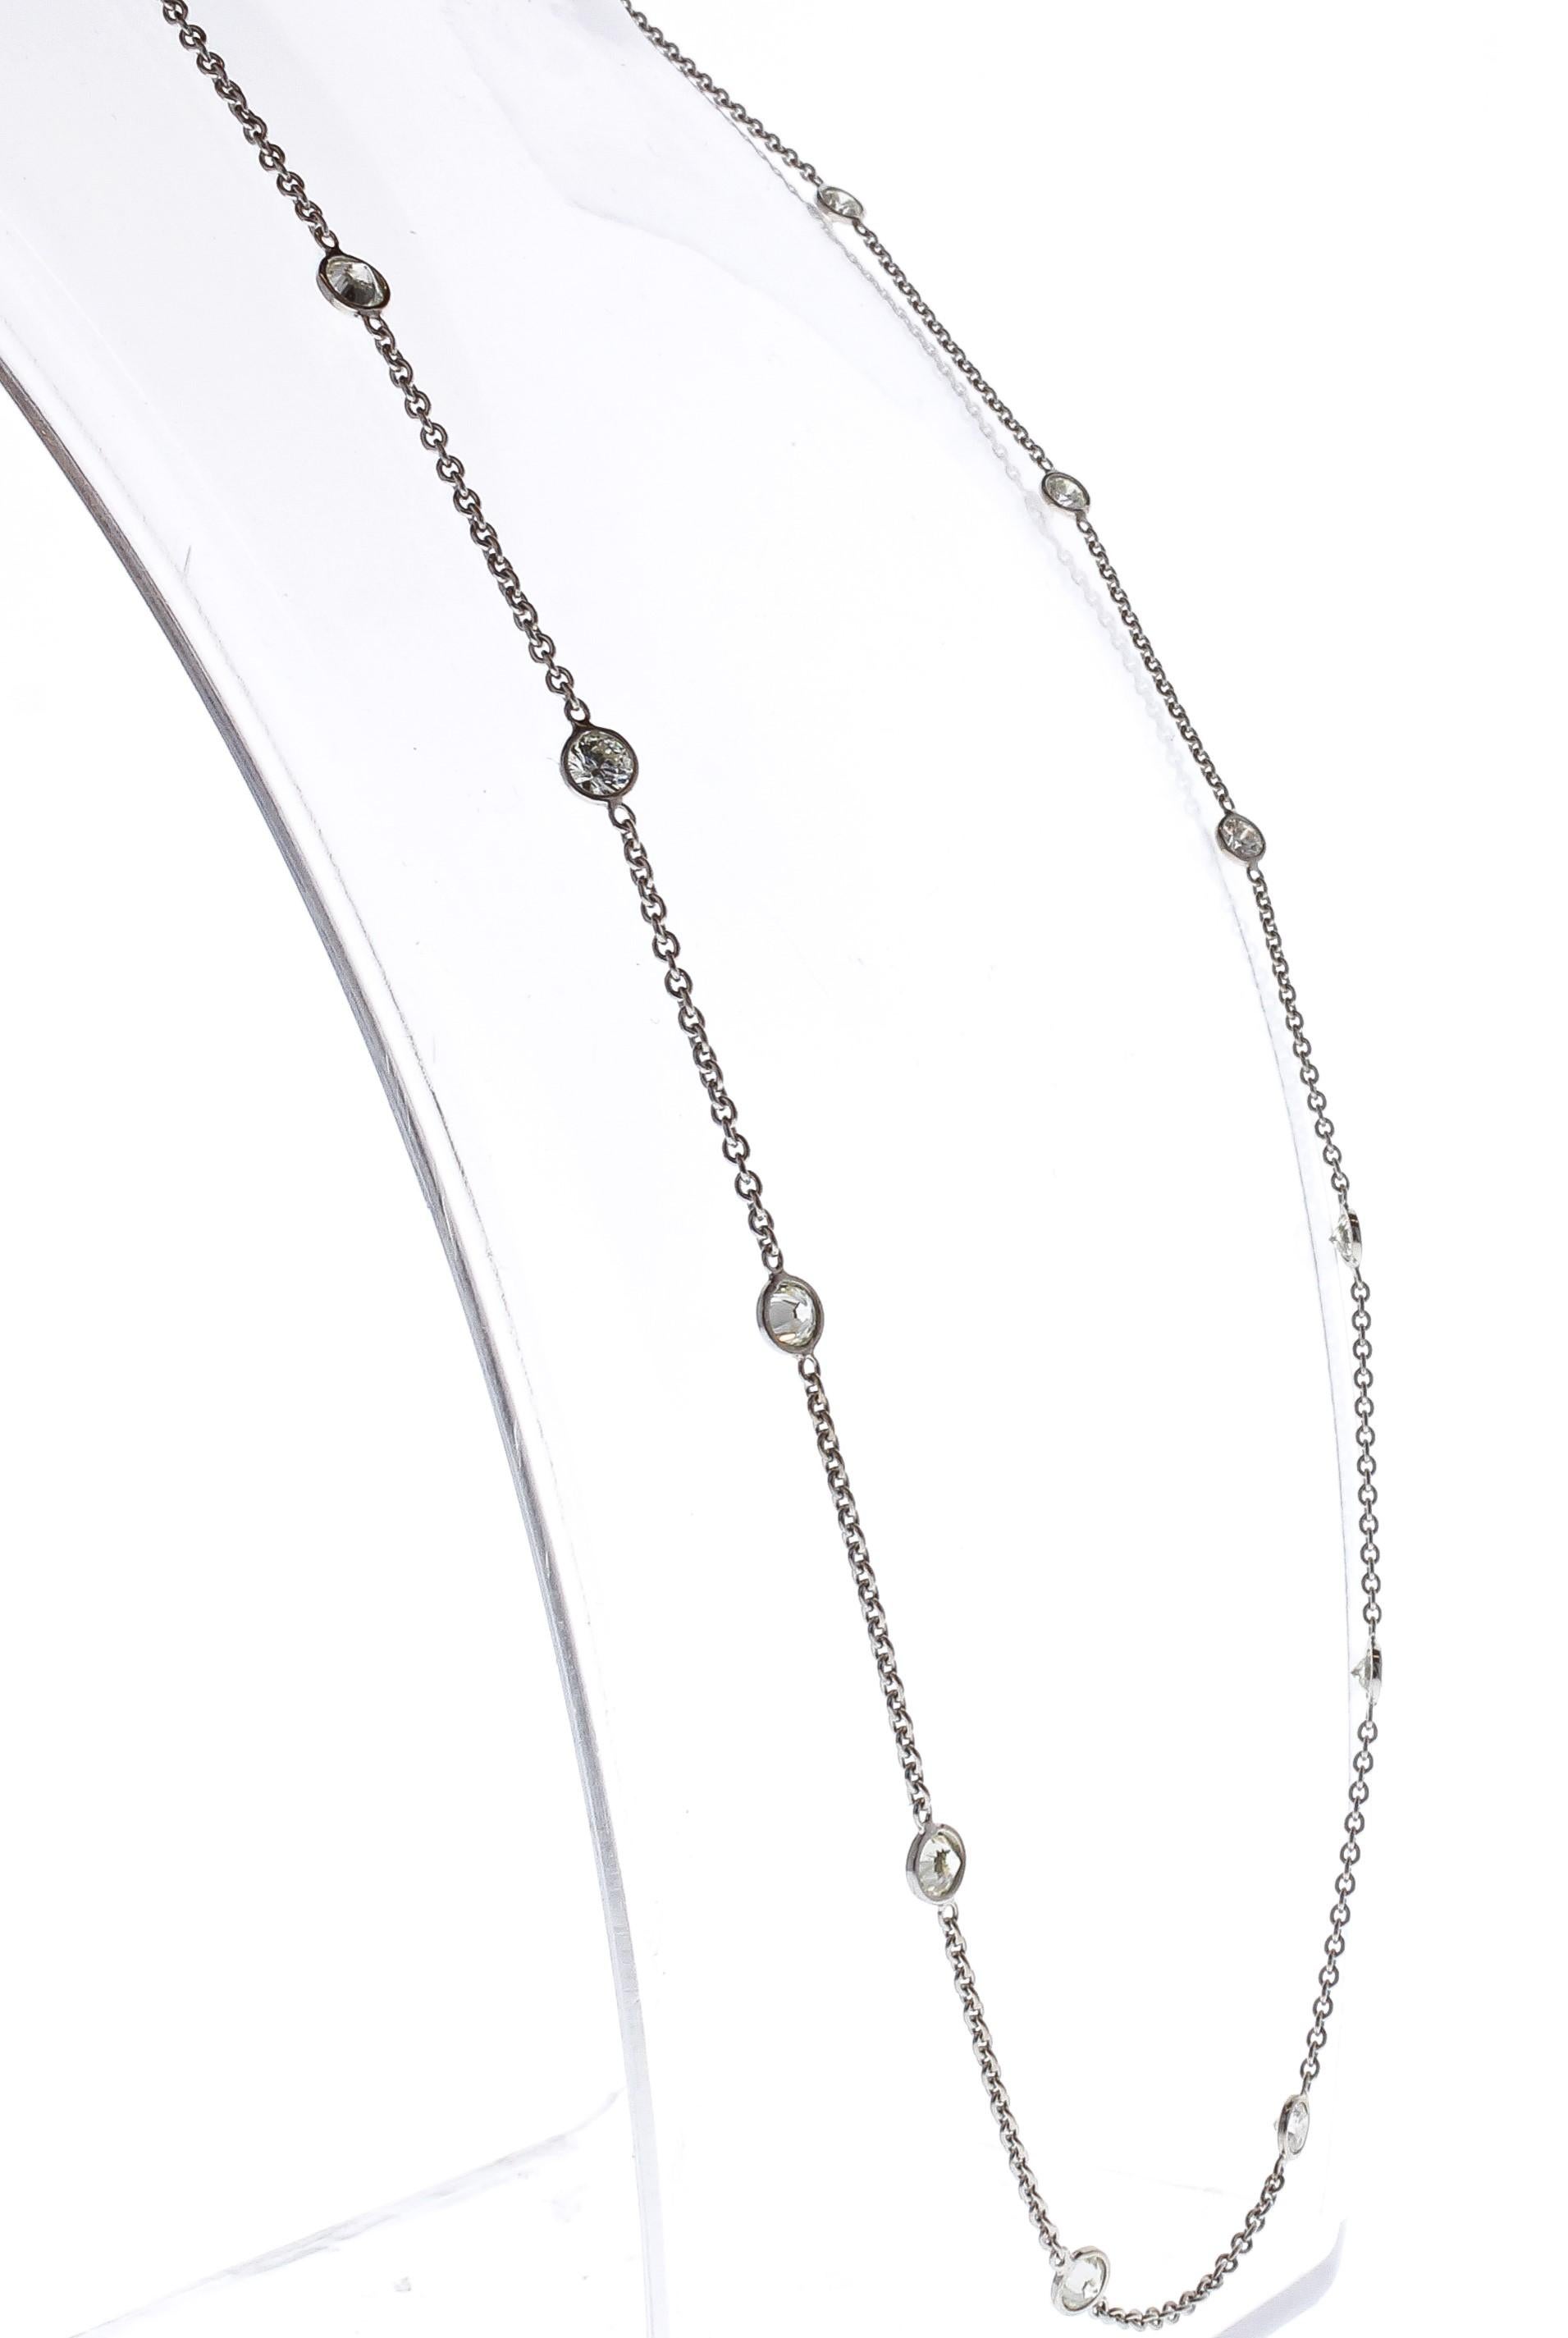 Round Cut 2.81 Carat Total Diamonds by the Yard Necklace in 14 Karat White Gold For Sale